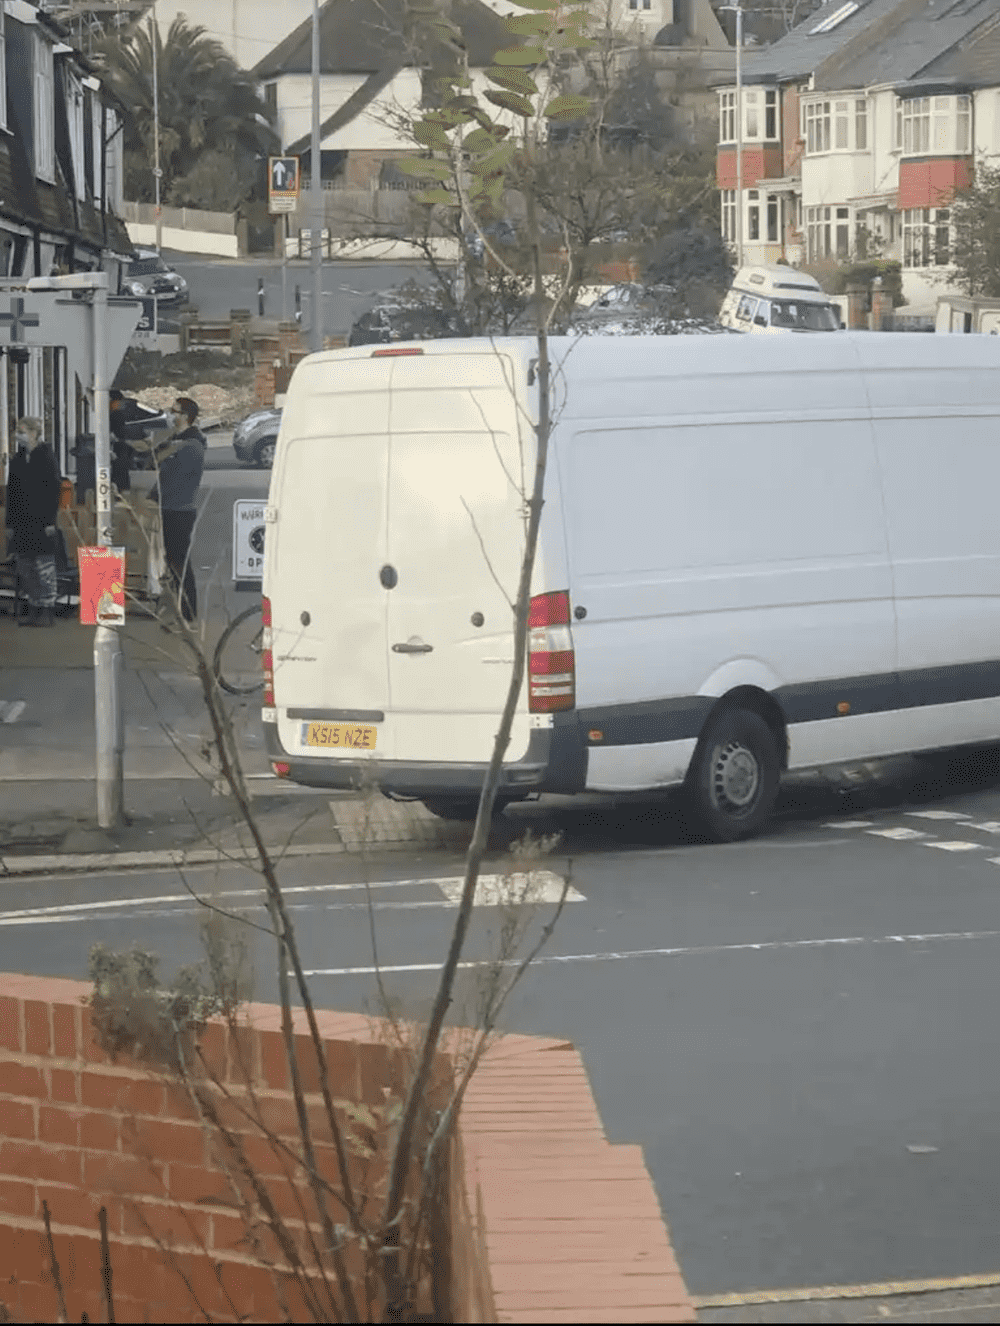 Photograph of KS15 NZE - a White Mercedes Sprinter parked in Hollingdean by a non-resident. The fourth of five photographs supplied by the residents of Hollingdean.